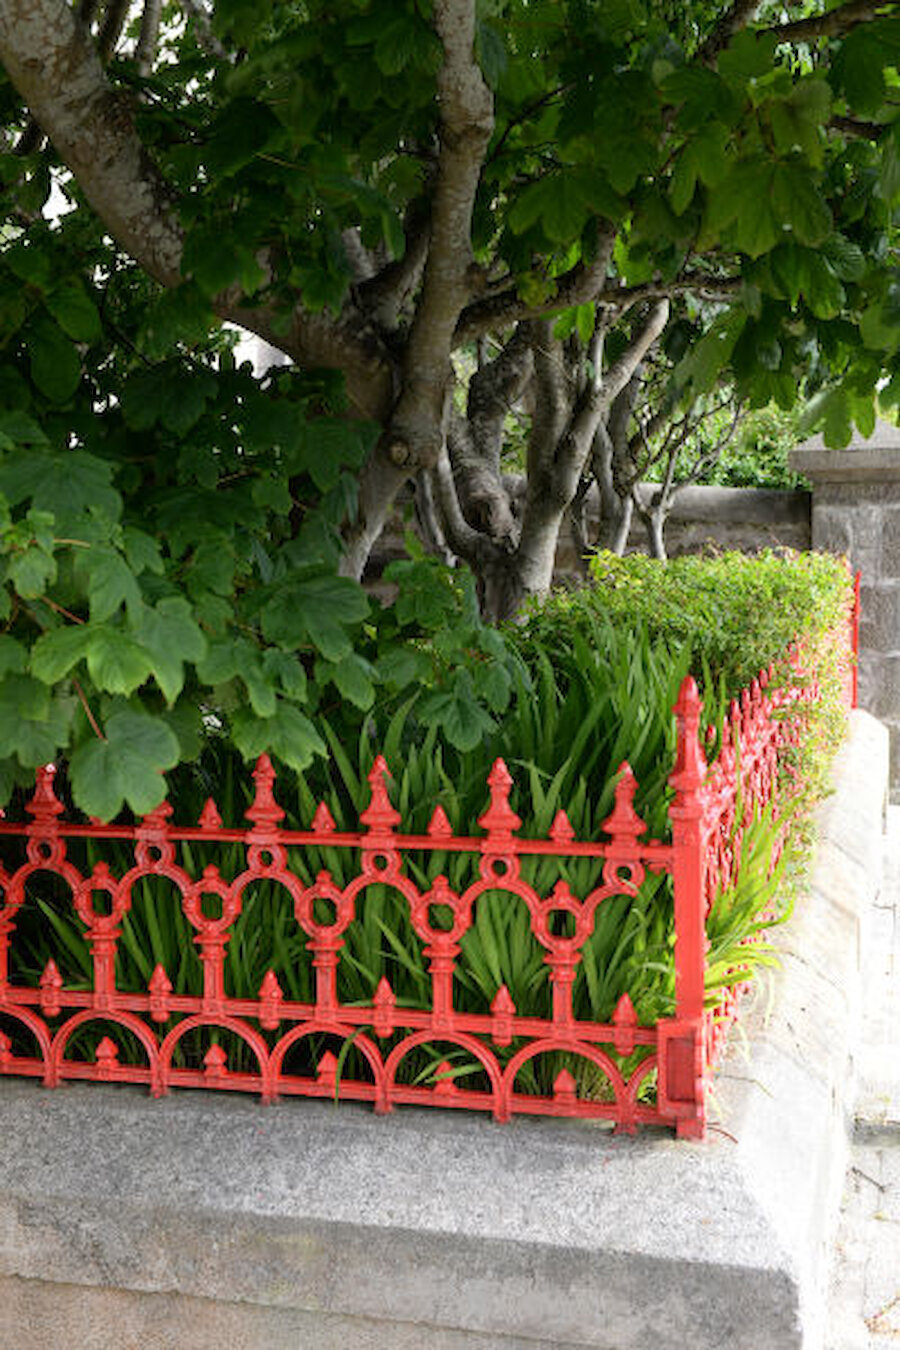 On the whole, Shetland's legacy of cast iron railings is well maintained.